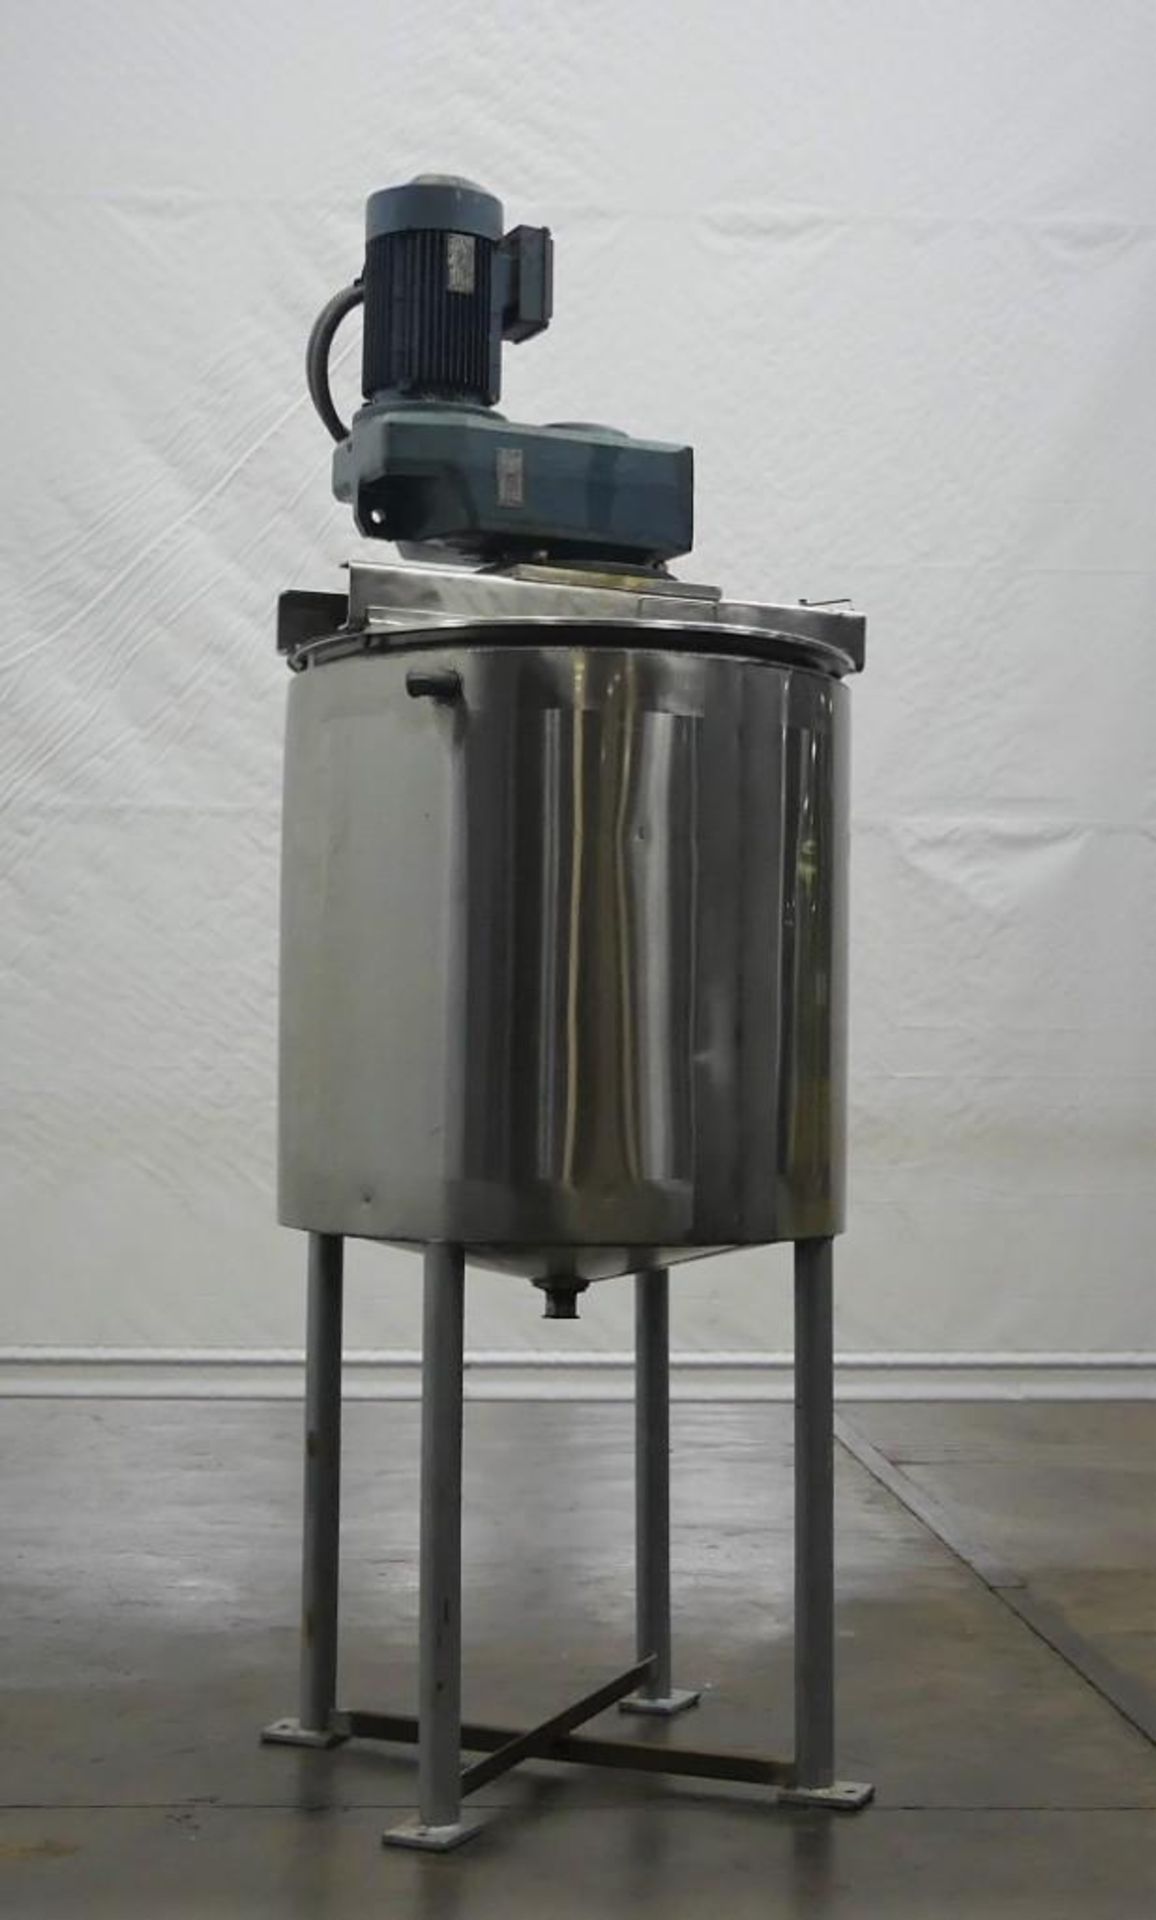 B&G Machine Company 100 Gallon Stainless Steel Jacketed Mixing Tank - Image 2 of 23